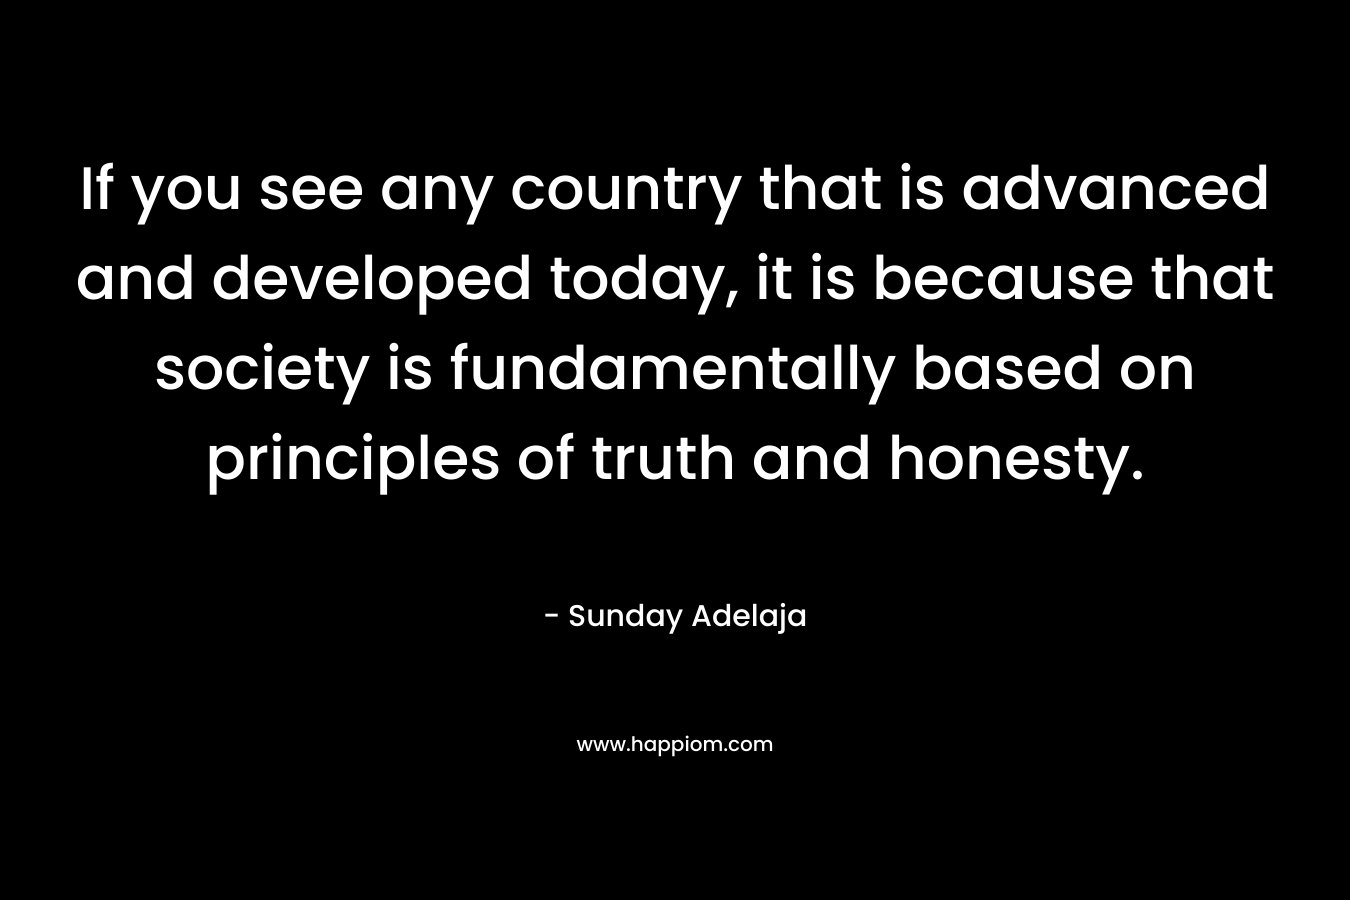 If you see any country that is advanced and developed today, it is because that society is fundamentally based on principles of truth and honesty. – Sunday Adelaja